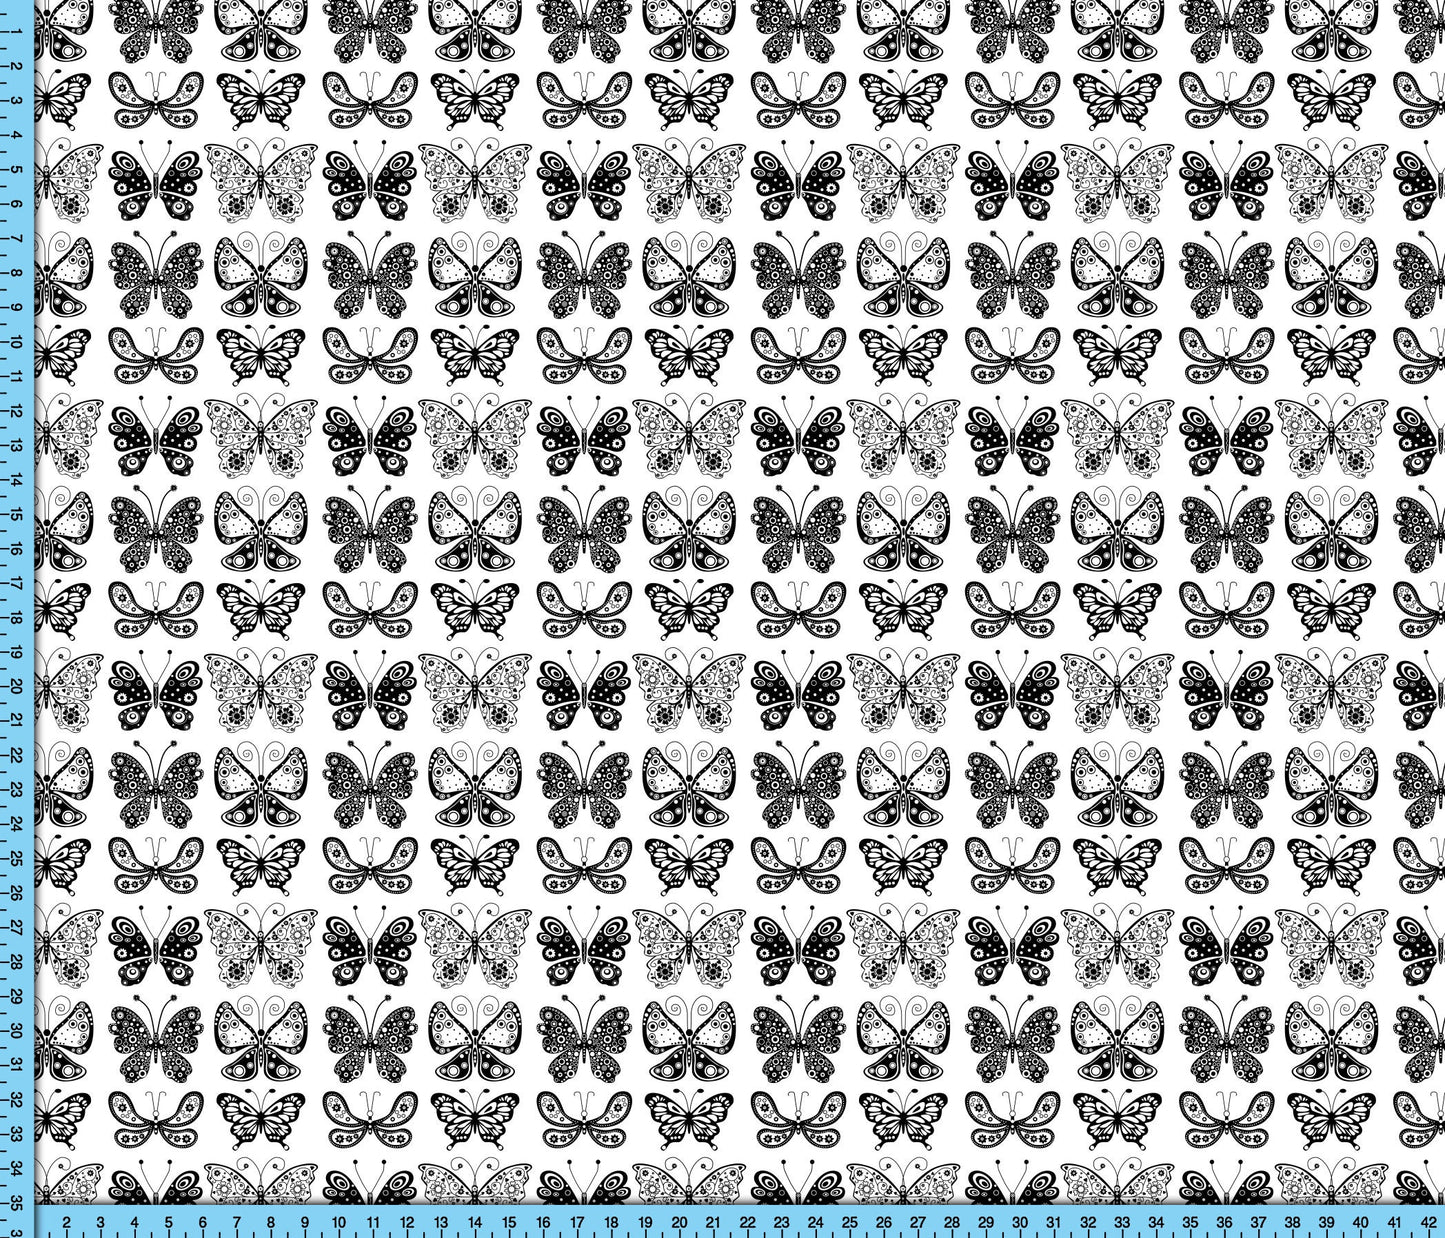 Butterfly Fabric, Black and White Butterflies on White.  Cottagecore Design for Crafts, Upholstery, Clothing